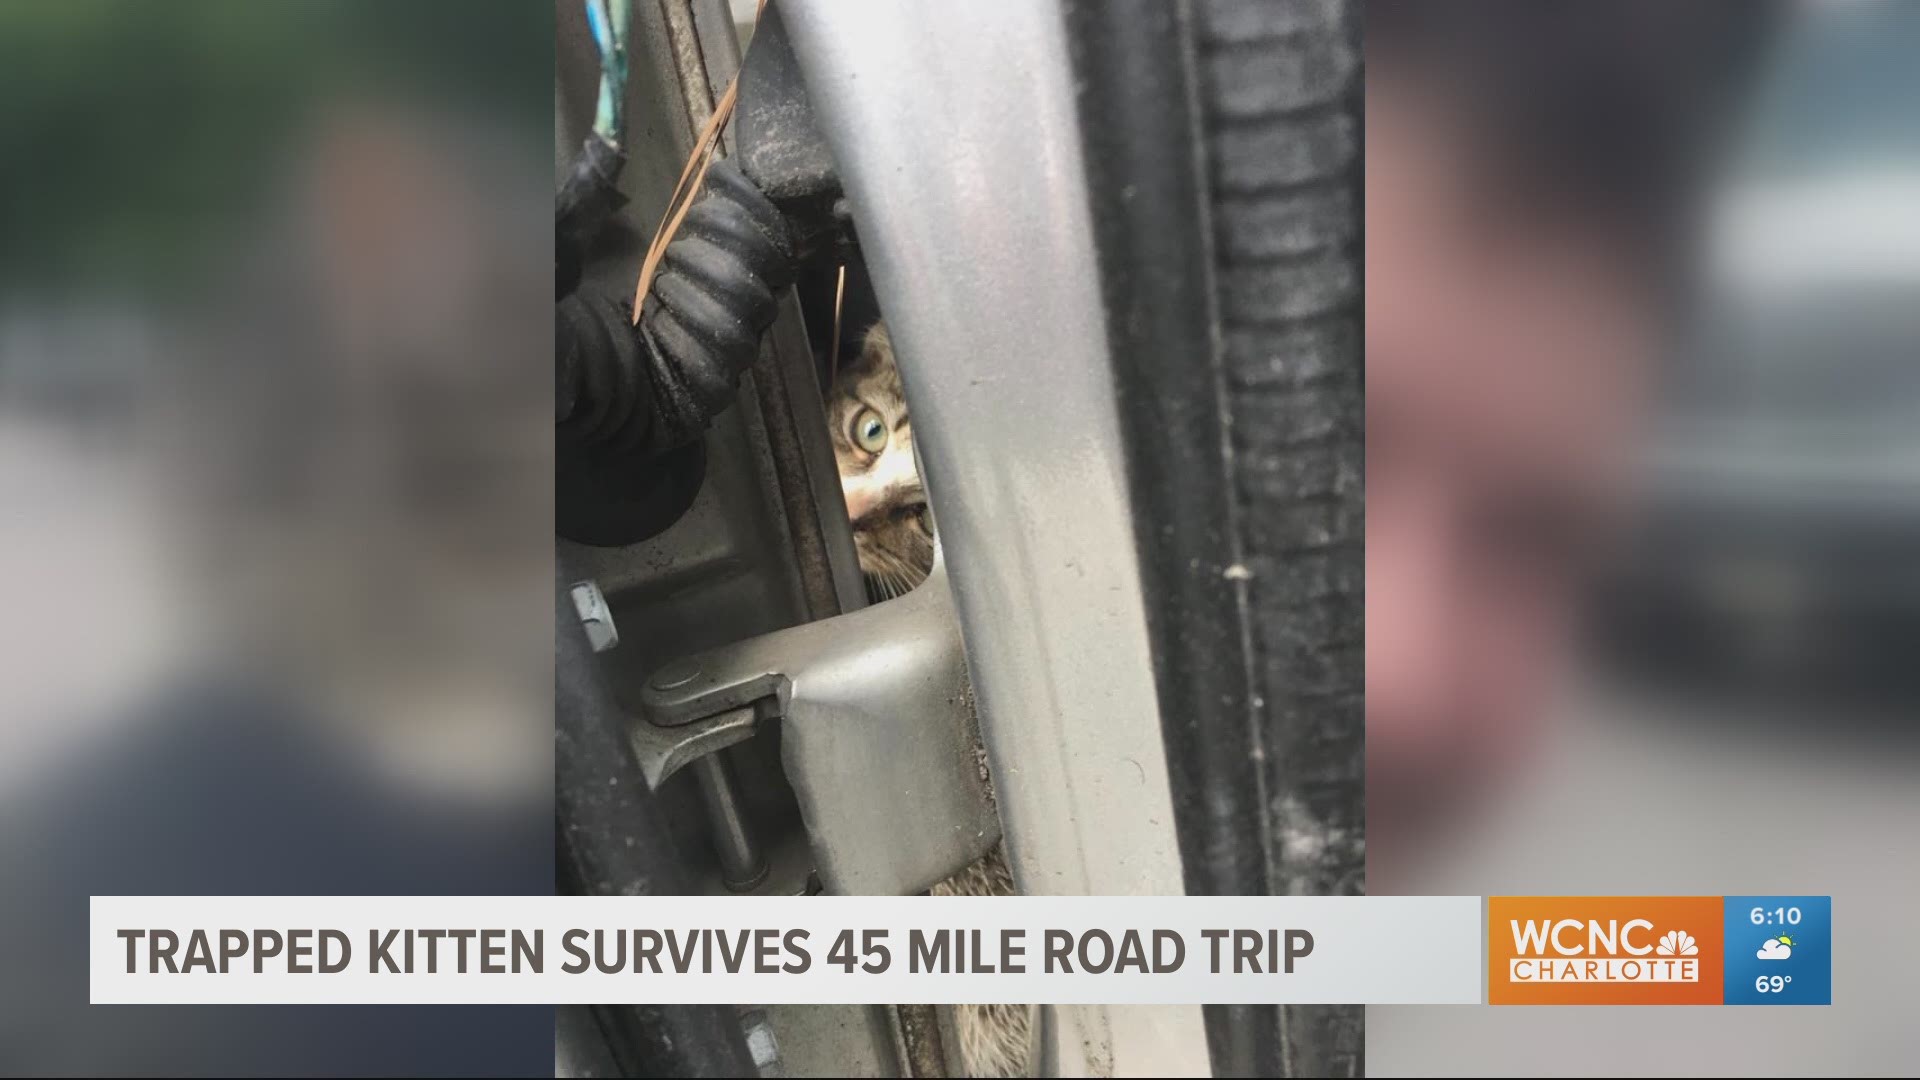 A Virginia woman said she had no clue a kitten was stuck in the fender wall of her minivan during her 45-mile road trip.